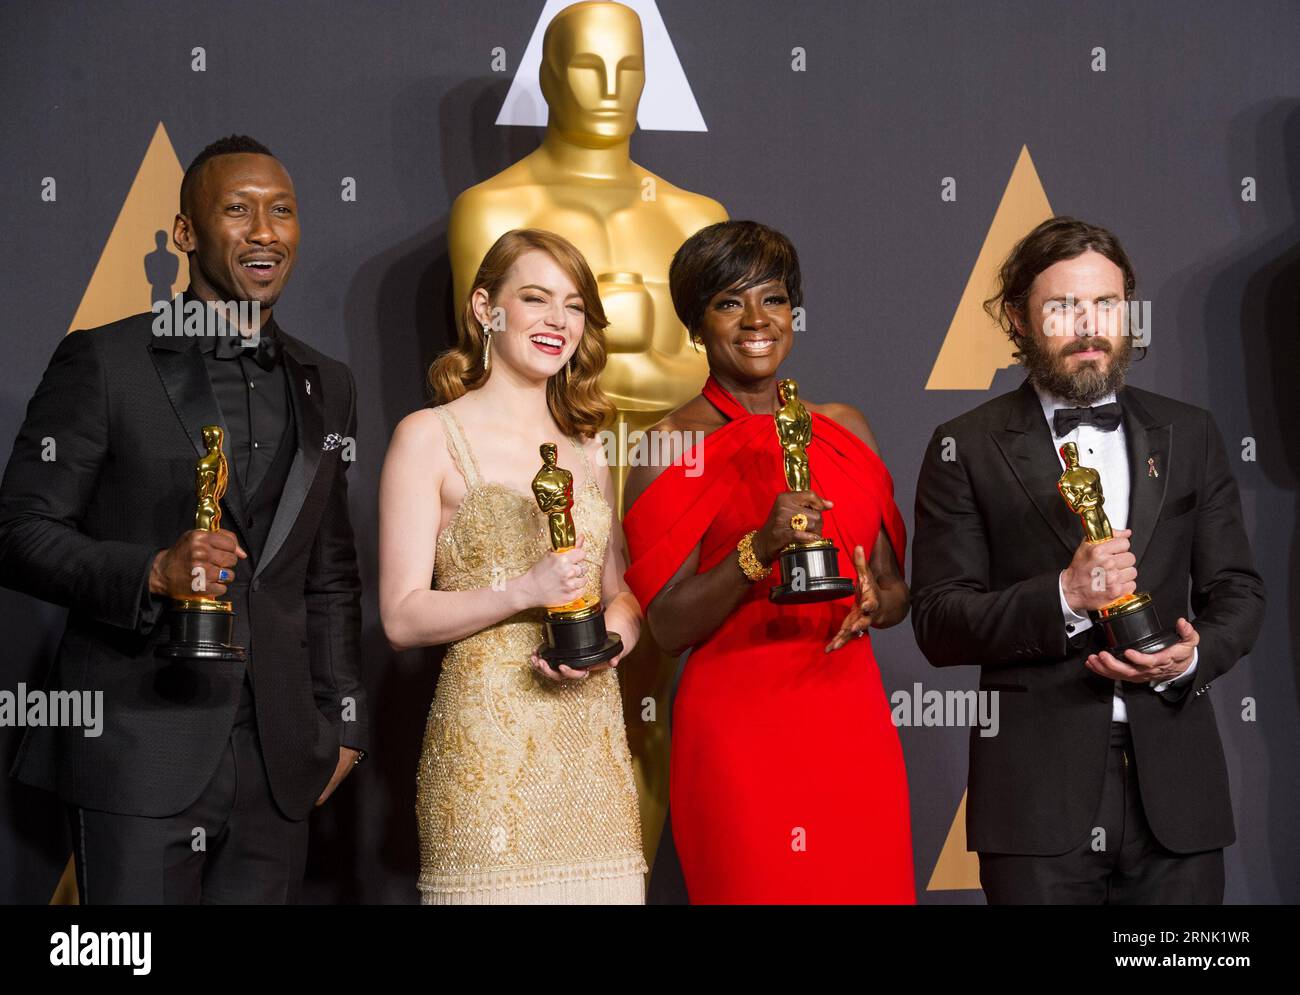 (L-R) Actor Mahershala Ali, winner of Best Supporting Actor for Moonlight, Emma Stone, winner of Best Actress for La La Land, Viola Davis, winner of Best Supporting Actress for Fences, and Casey Affleck, winner of Best Actor for Manchester by the Sea pose for group photos at press room of the 89th Academy Awards at the Dolby Theater in Los Angeles, the United States, on Feb. 26, 2017. ) (zxj) U.S.-LOS ANGELES-OSCAR-AWARD YangxLei PUBLICATIONxNOTxINxCHN   l r Actor Mahershala Ali Winner of Best Supporting Actor for Moonlight Emma Stone Winner of Best actress for La La Country Viola Davis Winner Stock Photo